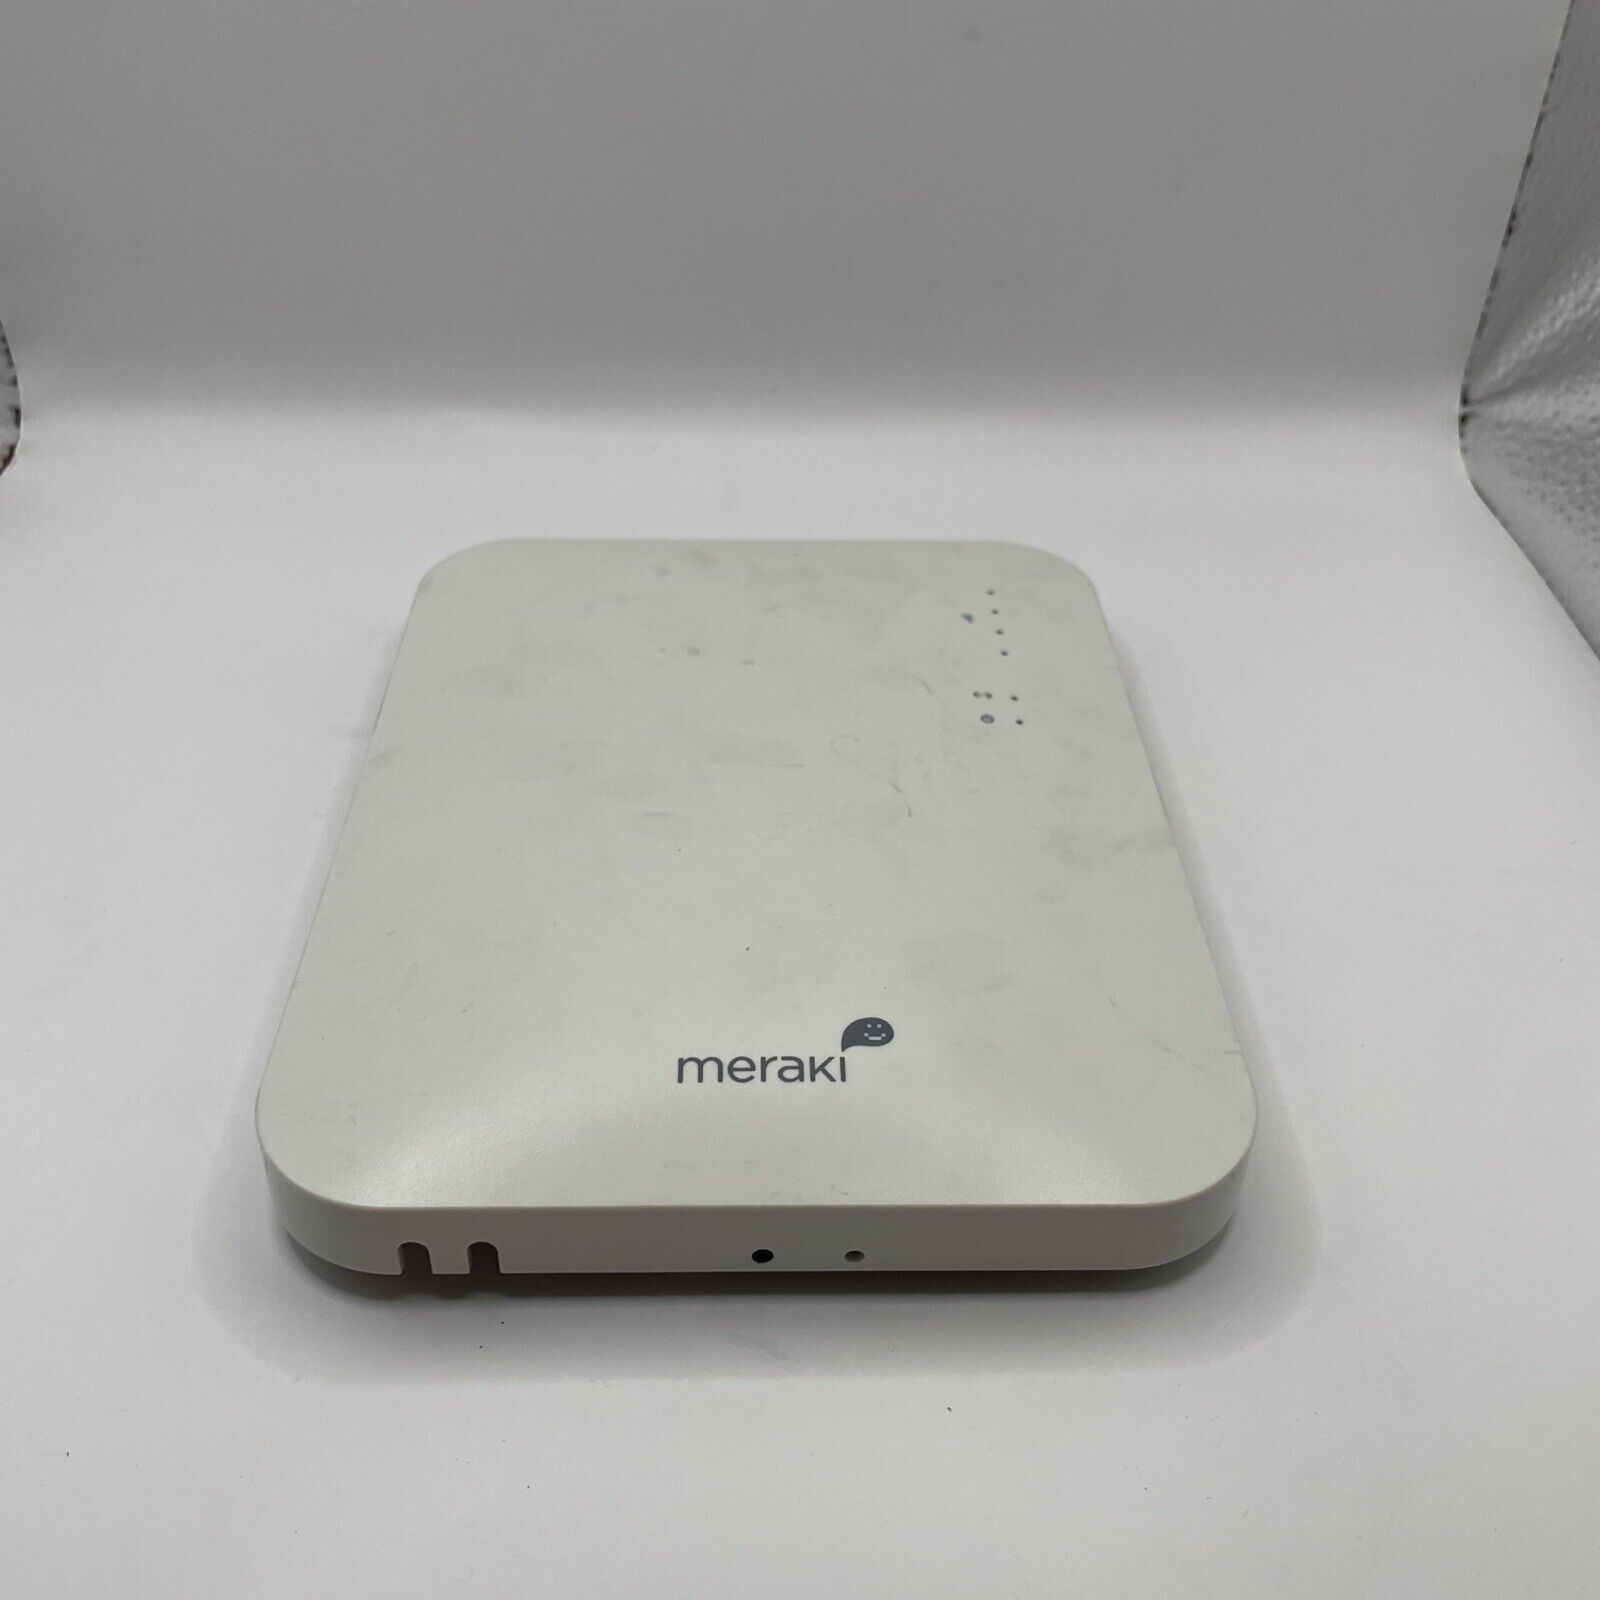 Meraki | MR12 | 600-13010-A | Wireless Access Point CLAIMED FOR PARTS